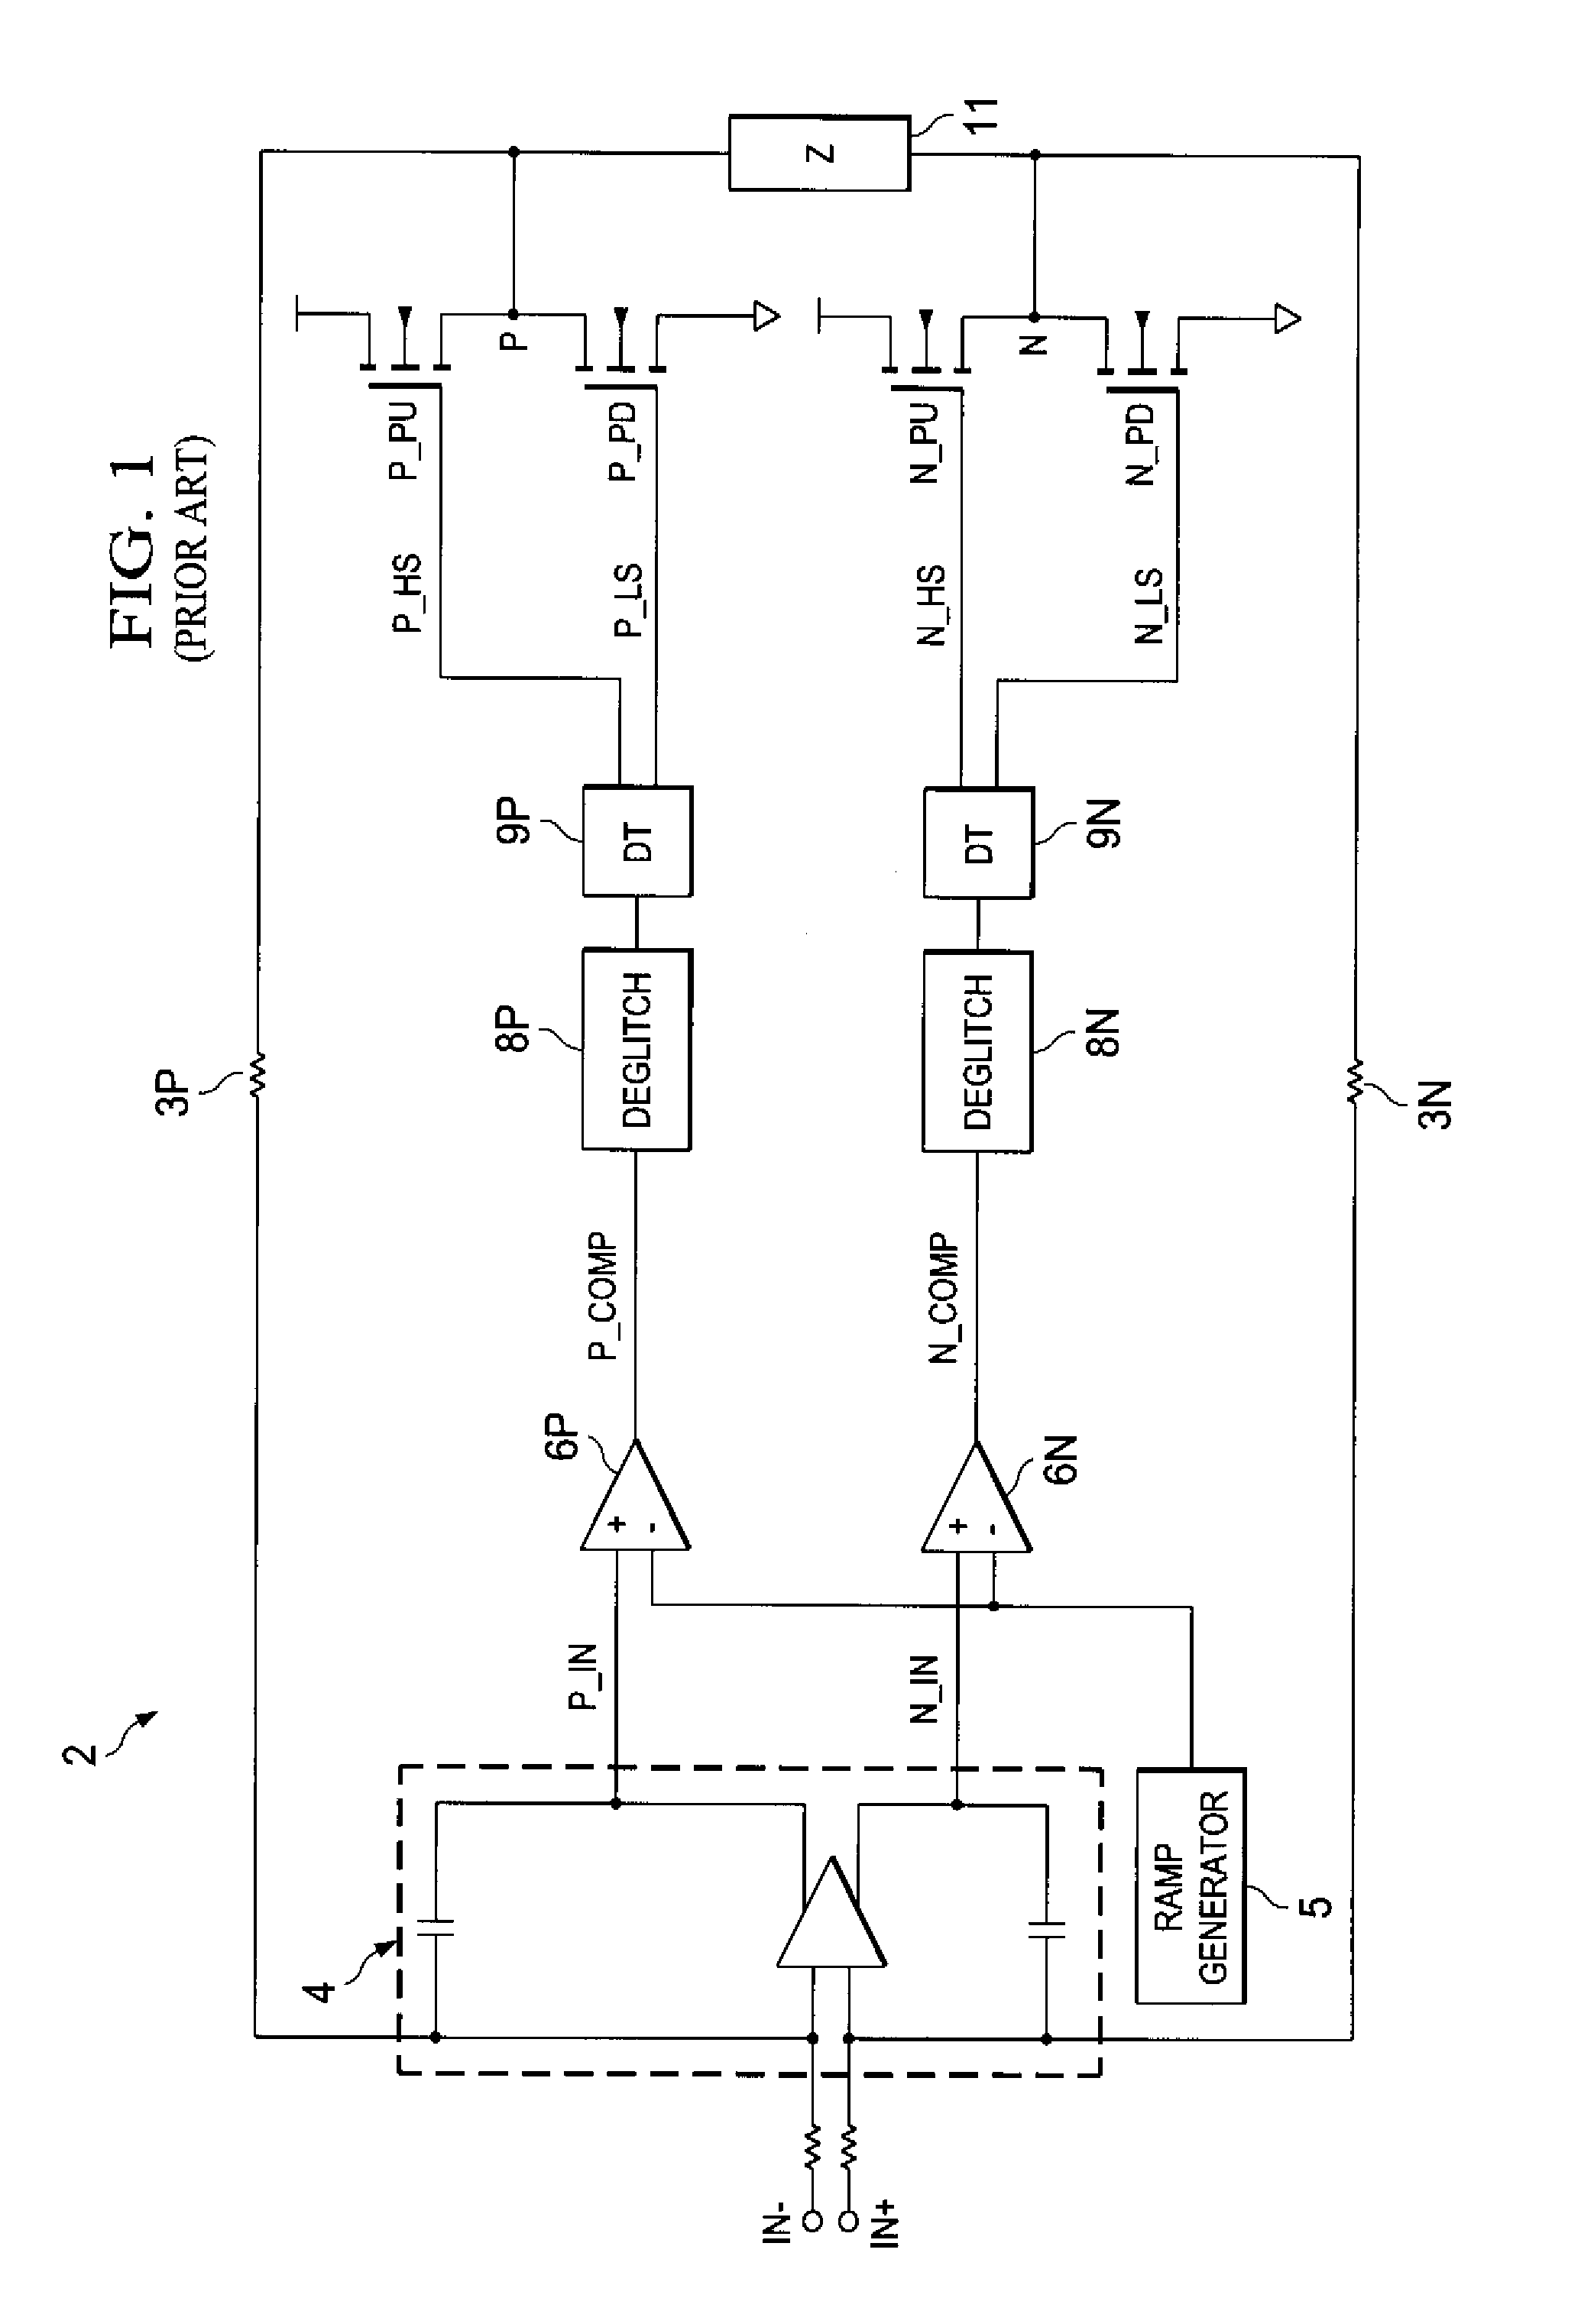 Reduction of dead-time distortion in class D amplifiers